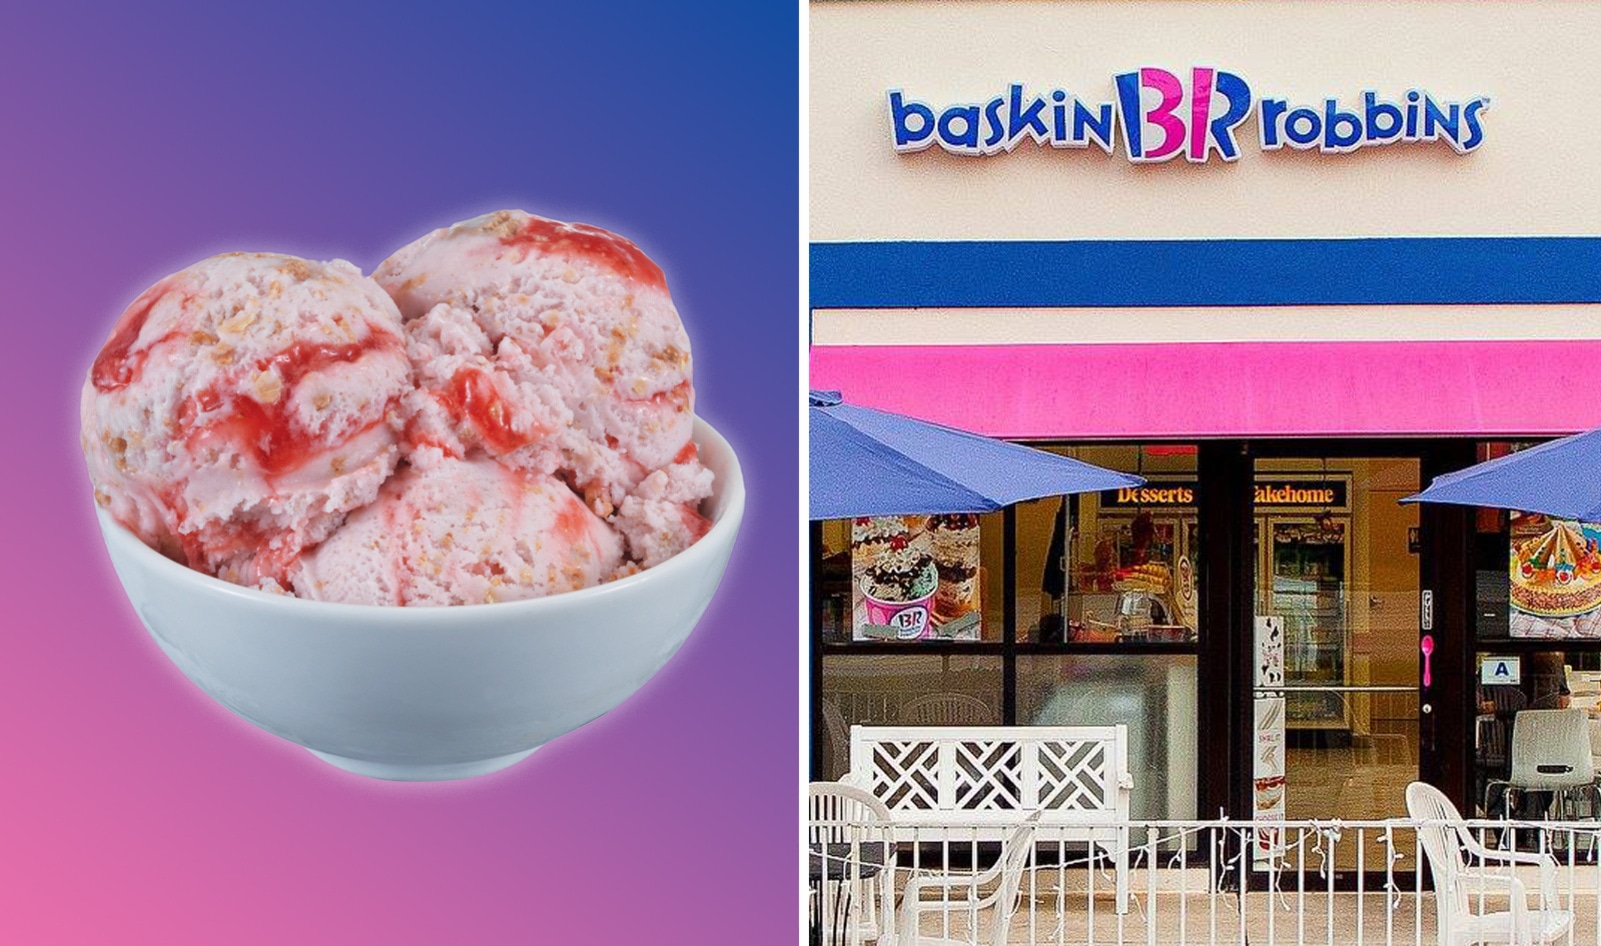 Baskin-Robbins Is First Major Chain to Serve Vegan Oat Milk Ice Cream. And You Can Get It At All 2,500 Locations